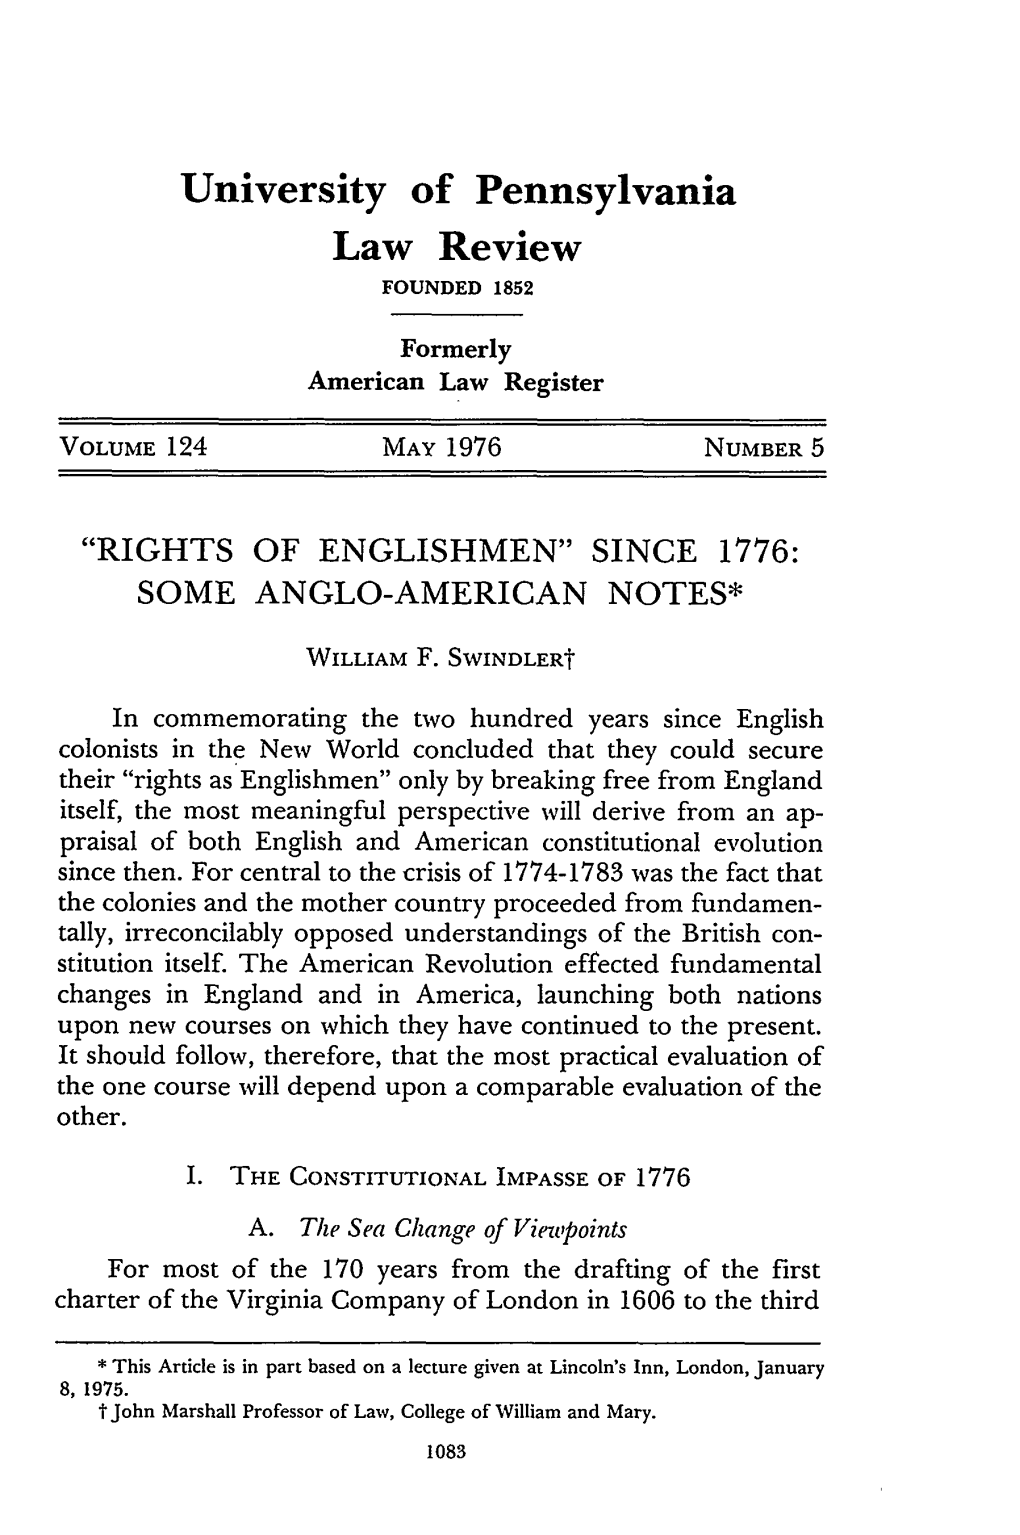 Rights of Englishmen Since 1776: Some Anglo-American Notes